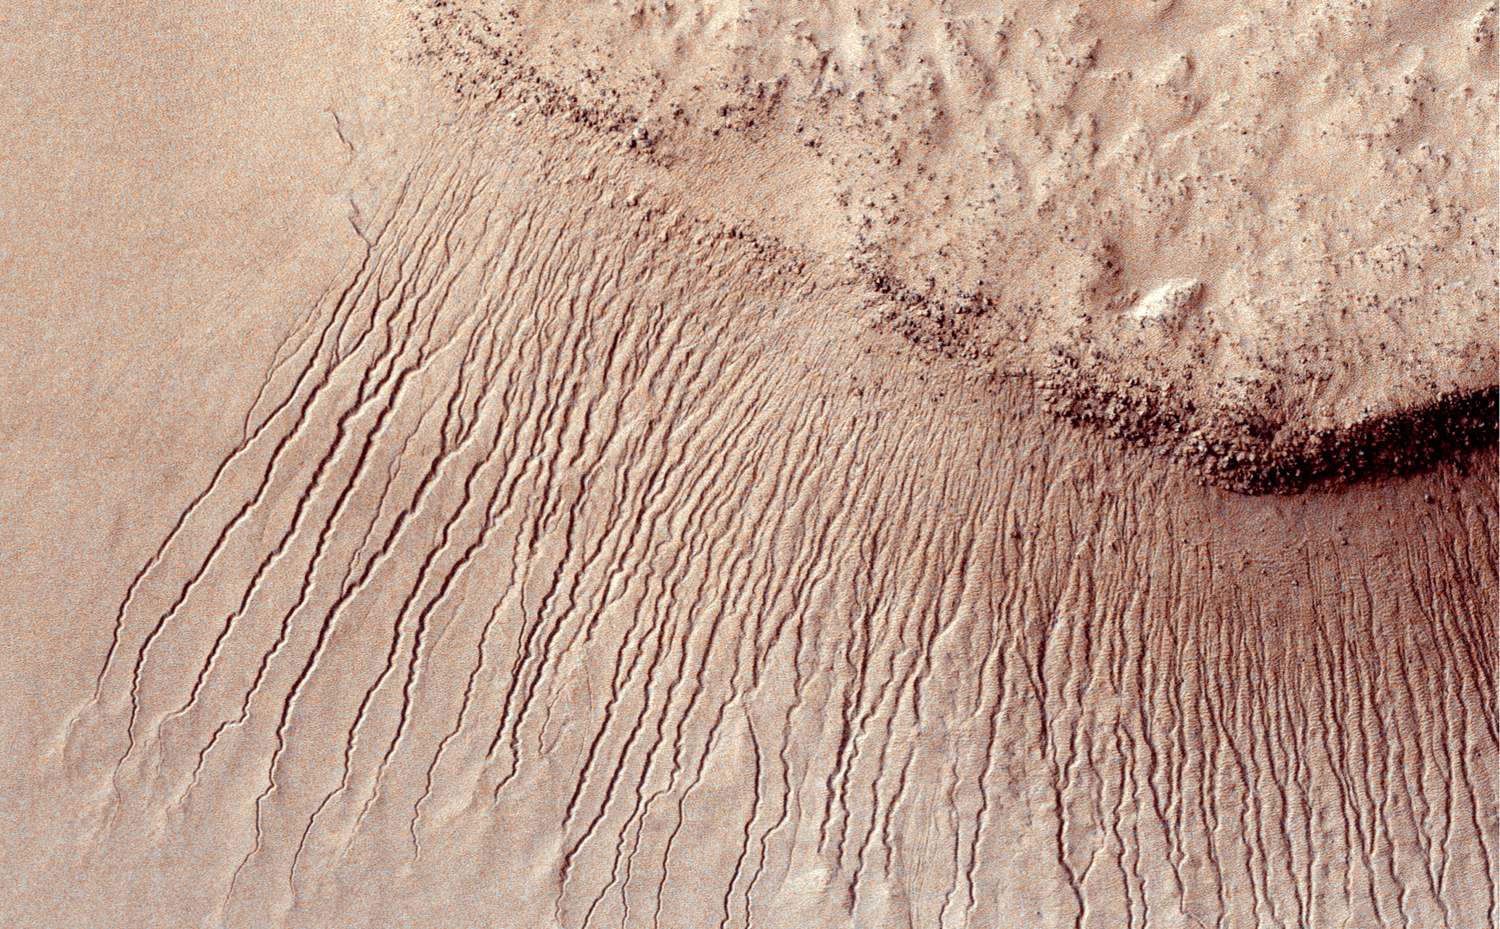 Images like this from the High Resolution Imaging Science  Experiment (HiRISE) camera on NASA's Mars Reconnaissance Orbiter show portions  of the Martian surface in unprecedented detail.